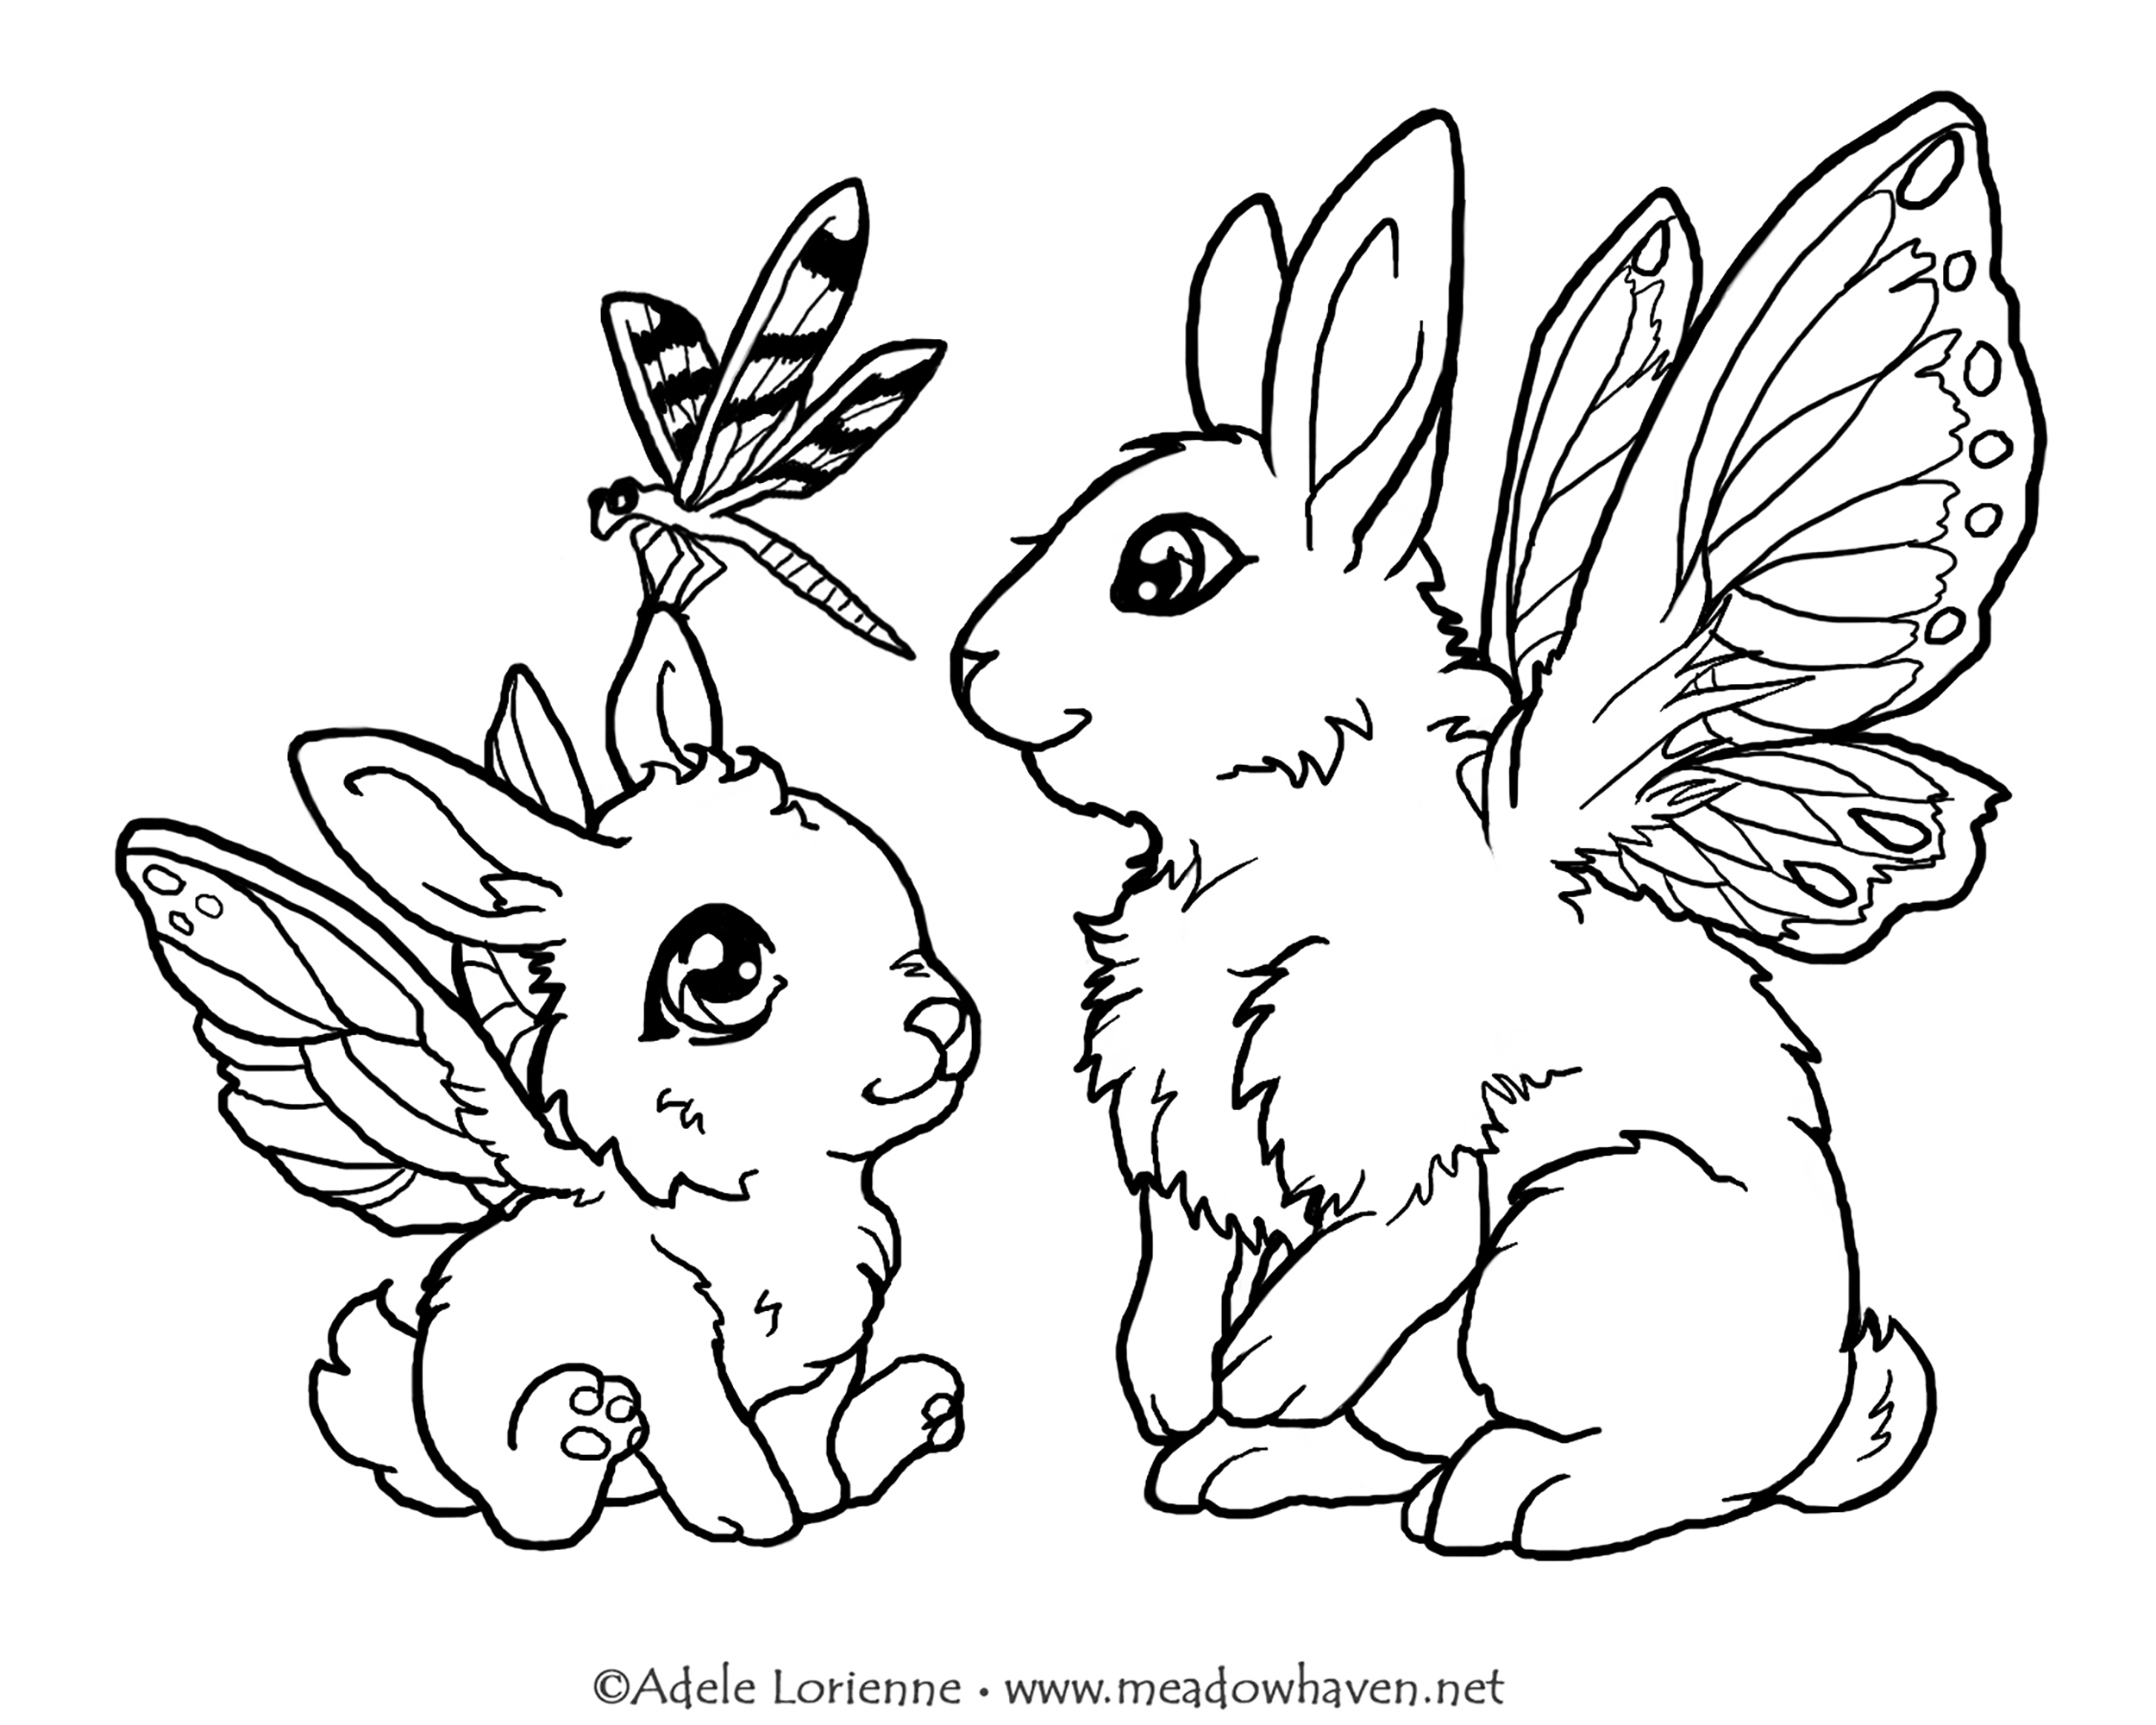 Those cute bunnies will show you how to fly like a dragonfly if you color them !, Artist : Meadowhaven